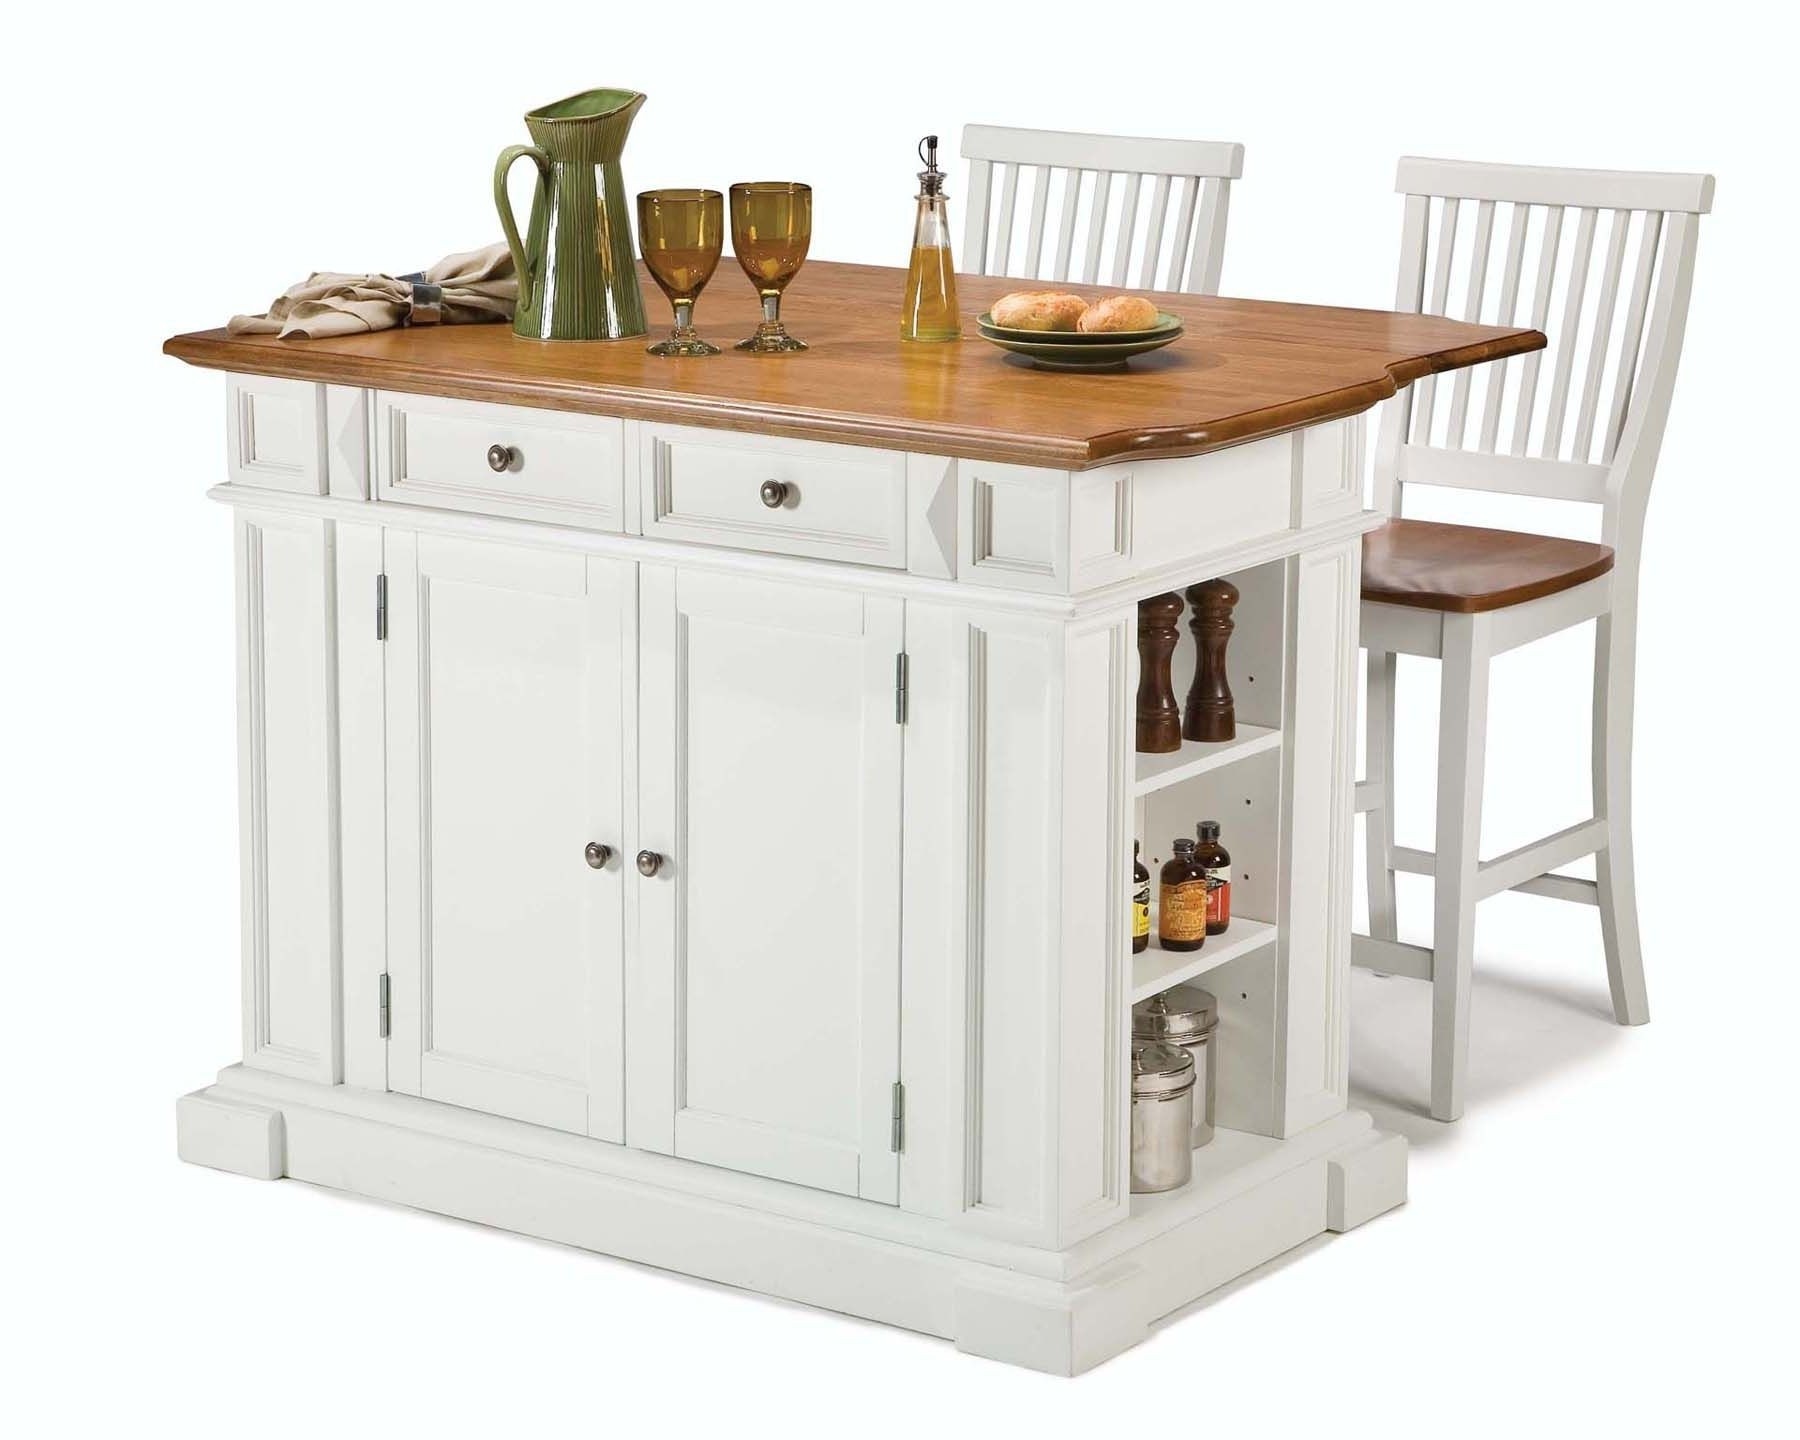 Small kitchen islands with breakfast bar 1